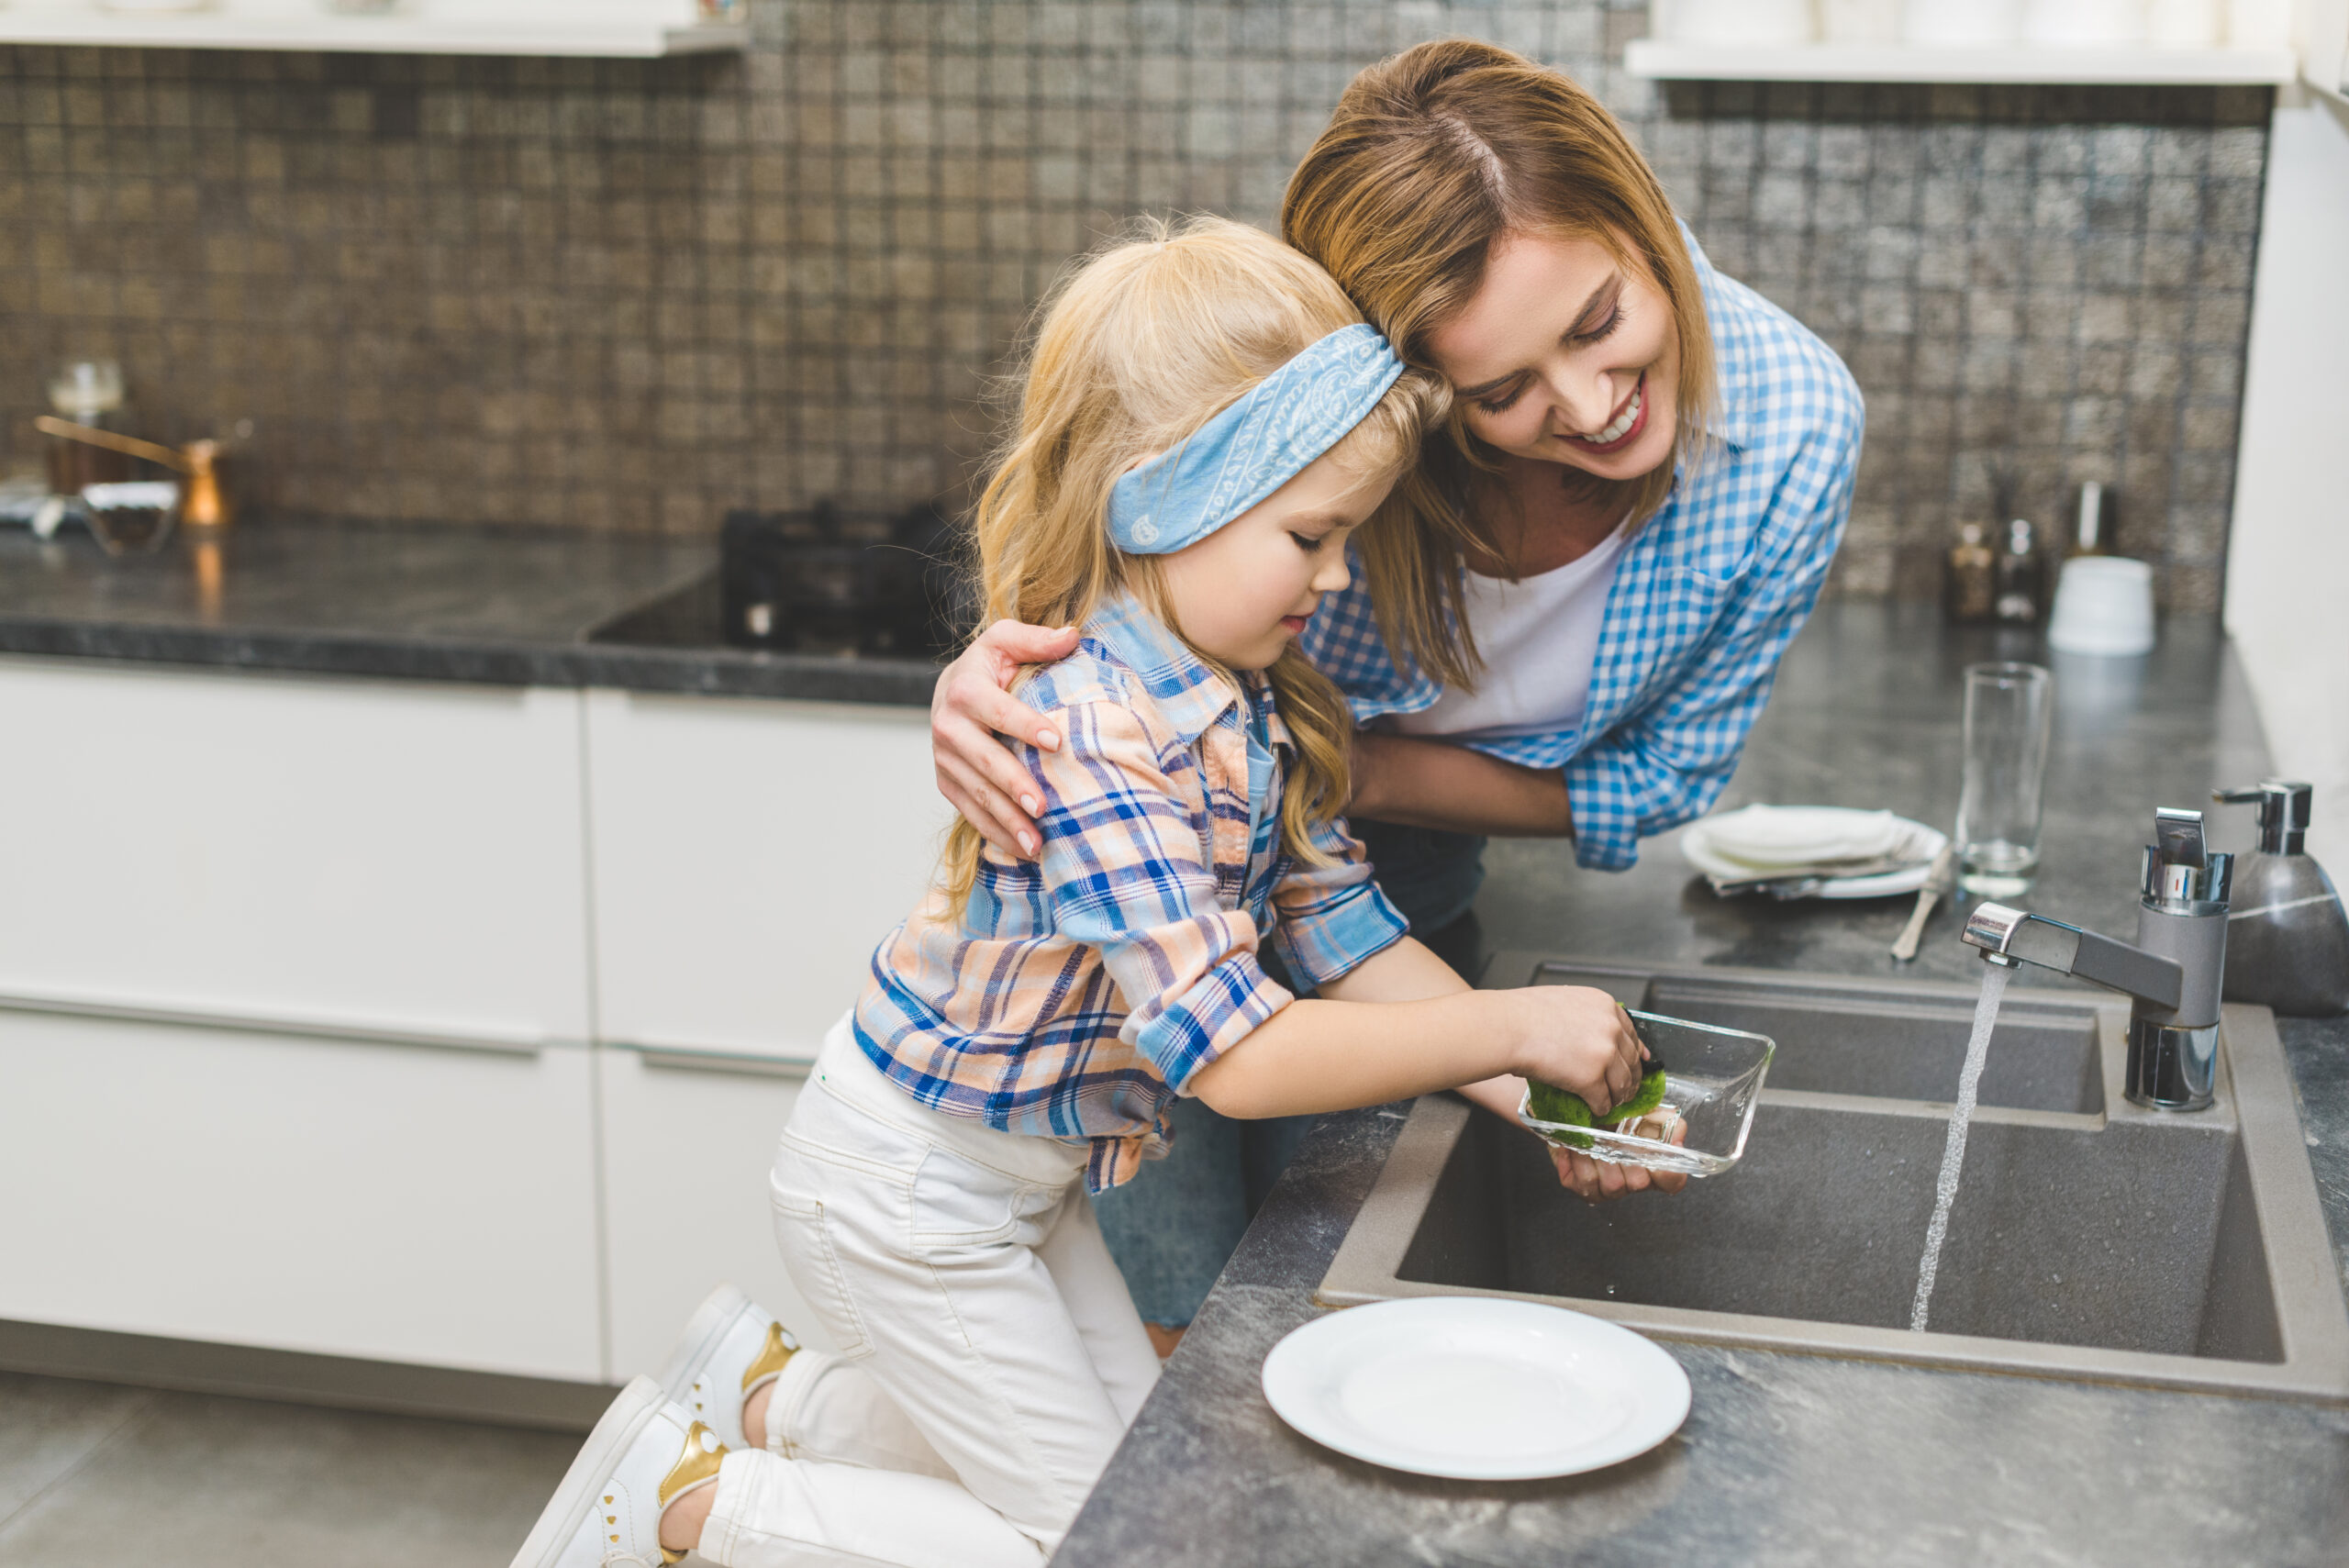 A woman and a young child, smiling and performing aspen maintenance on dishes together in a kitchen.